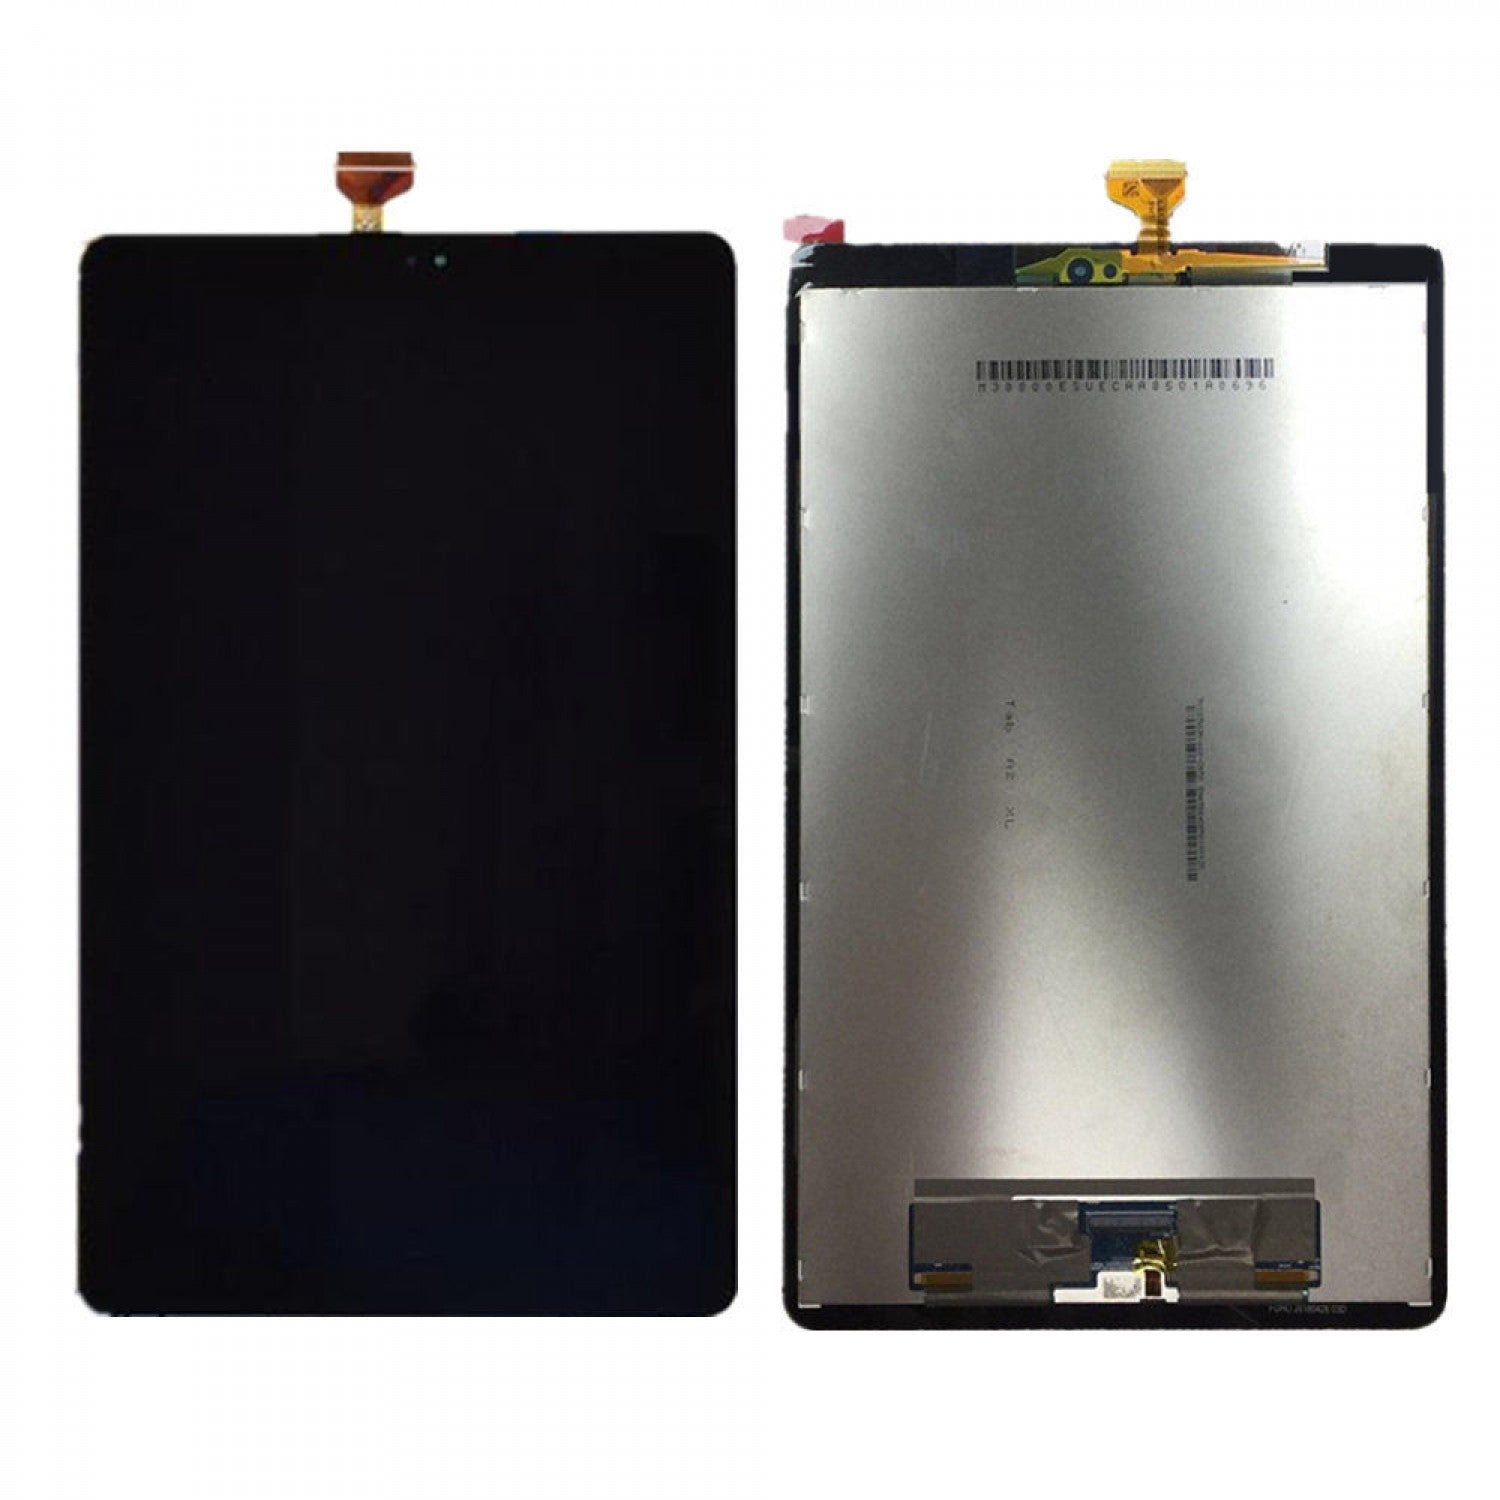 Samsung Galaxy Tab A 10.5 T590 LCD Screen and Digitizer Assembly